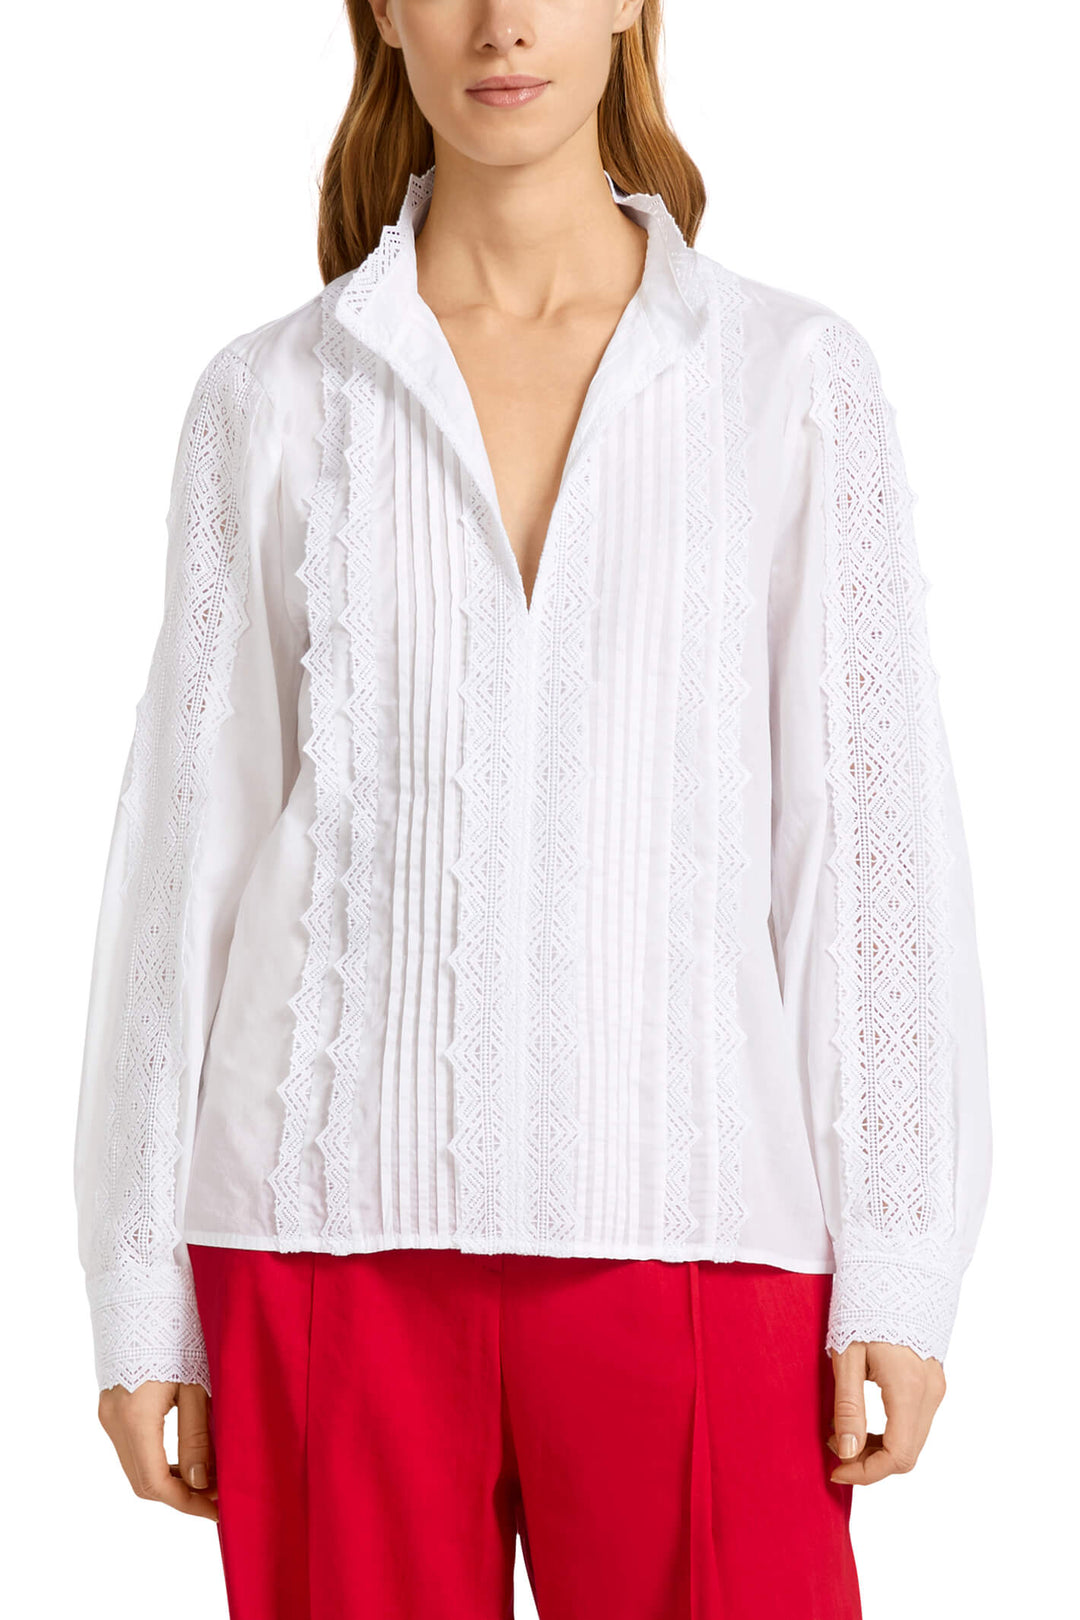 Marc Cain Collection UC 51.36 W94 White Lace Panel Shirt Top - Olivia Grace Fashion